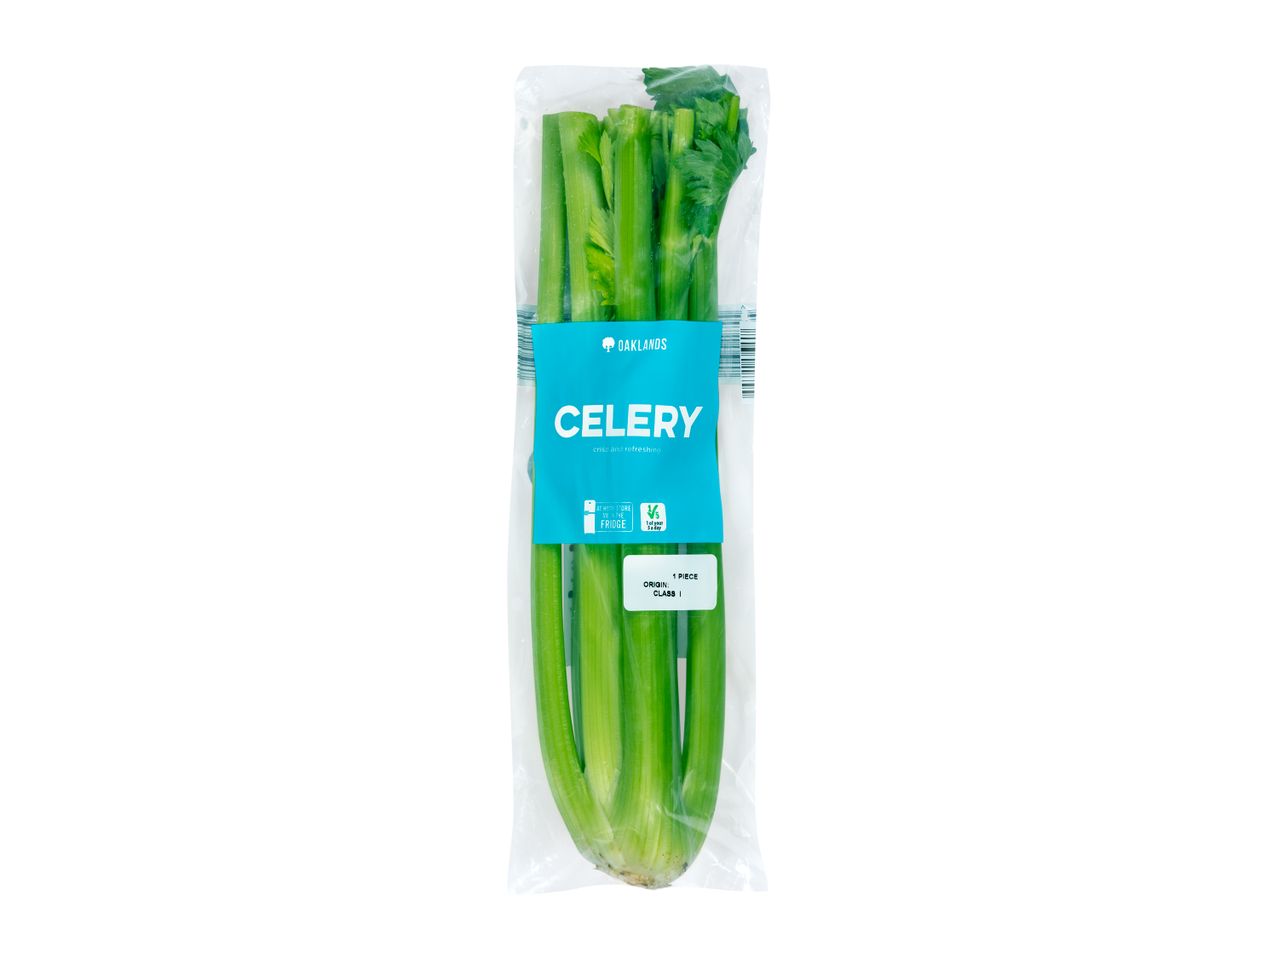 Go to full screen view: Celery - Image 2